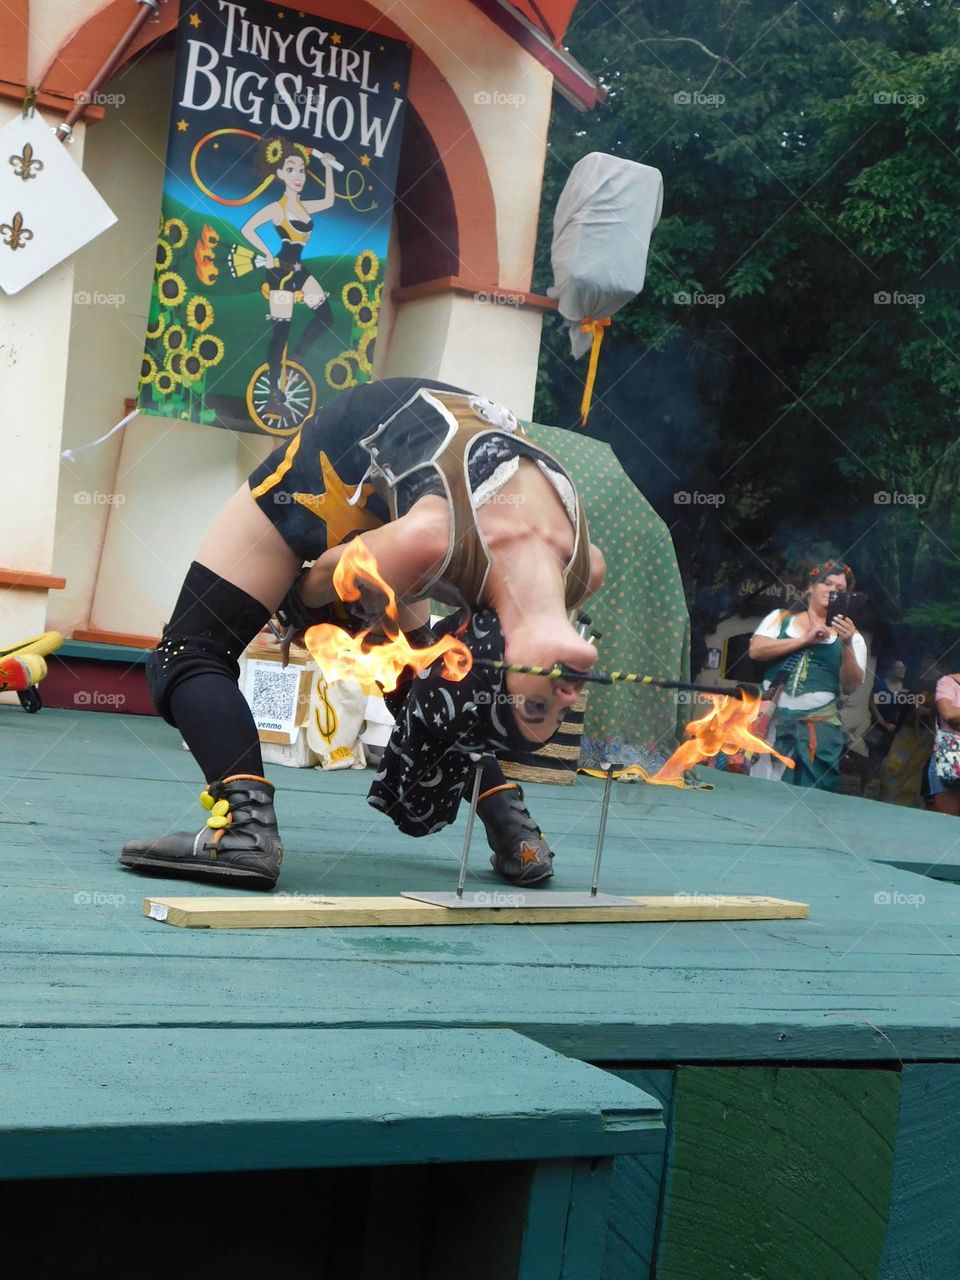 Female contortionist on stage with fire 